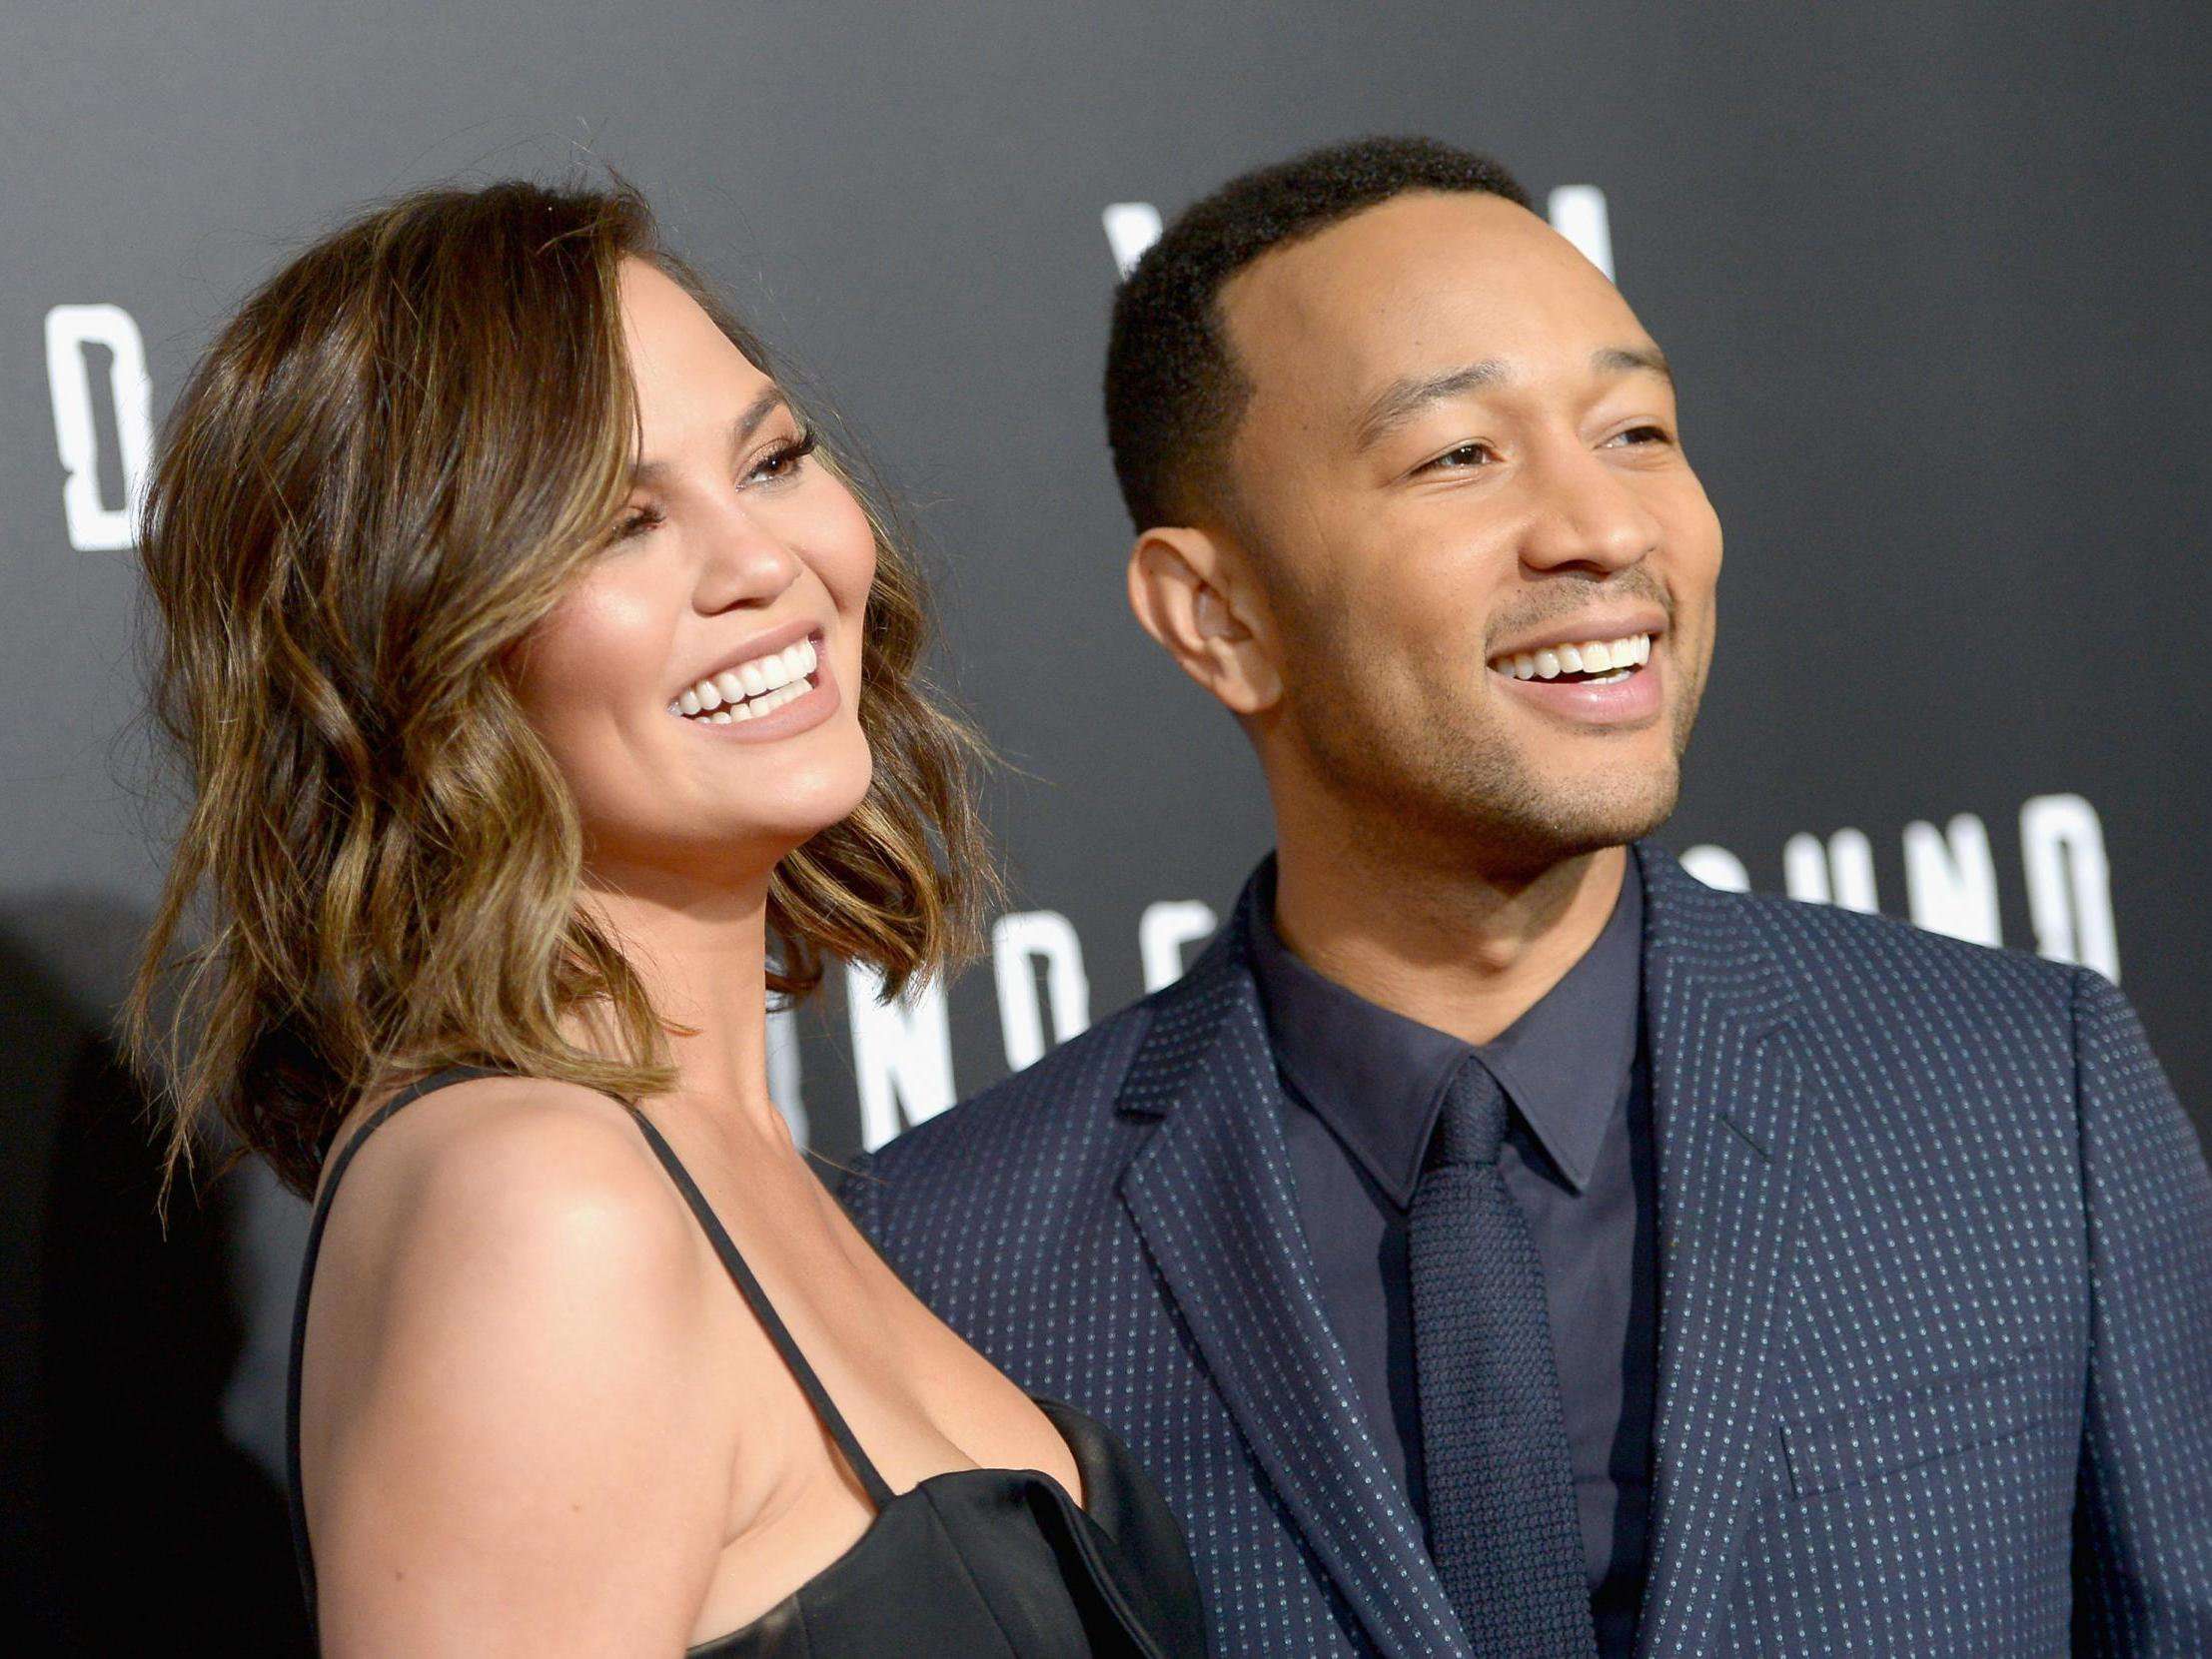 image for Trump labelled 'p**** a** b****' by Chrissy Teigen after he refers to her as John Legend's 'filthy mouthed wife'